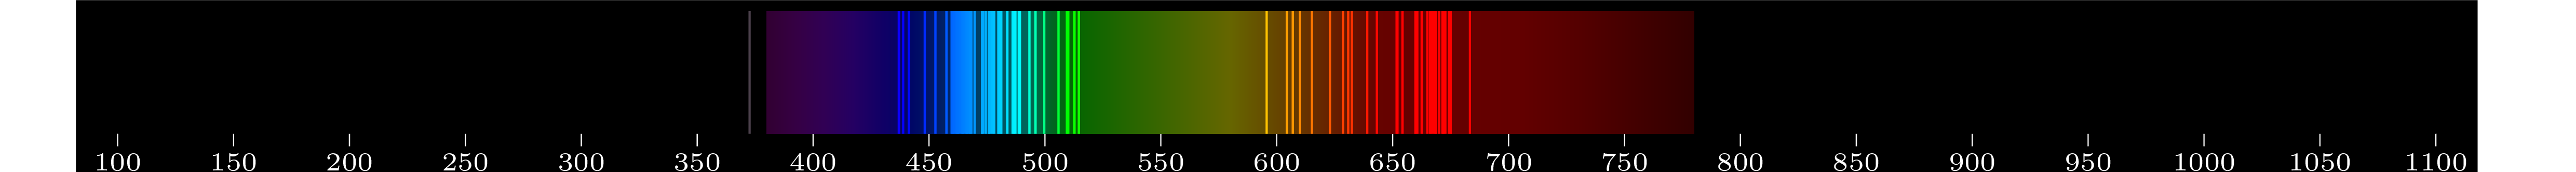 emmision spectra of element Pm